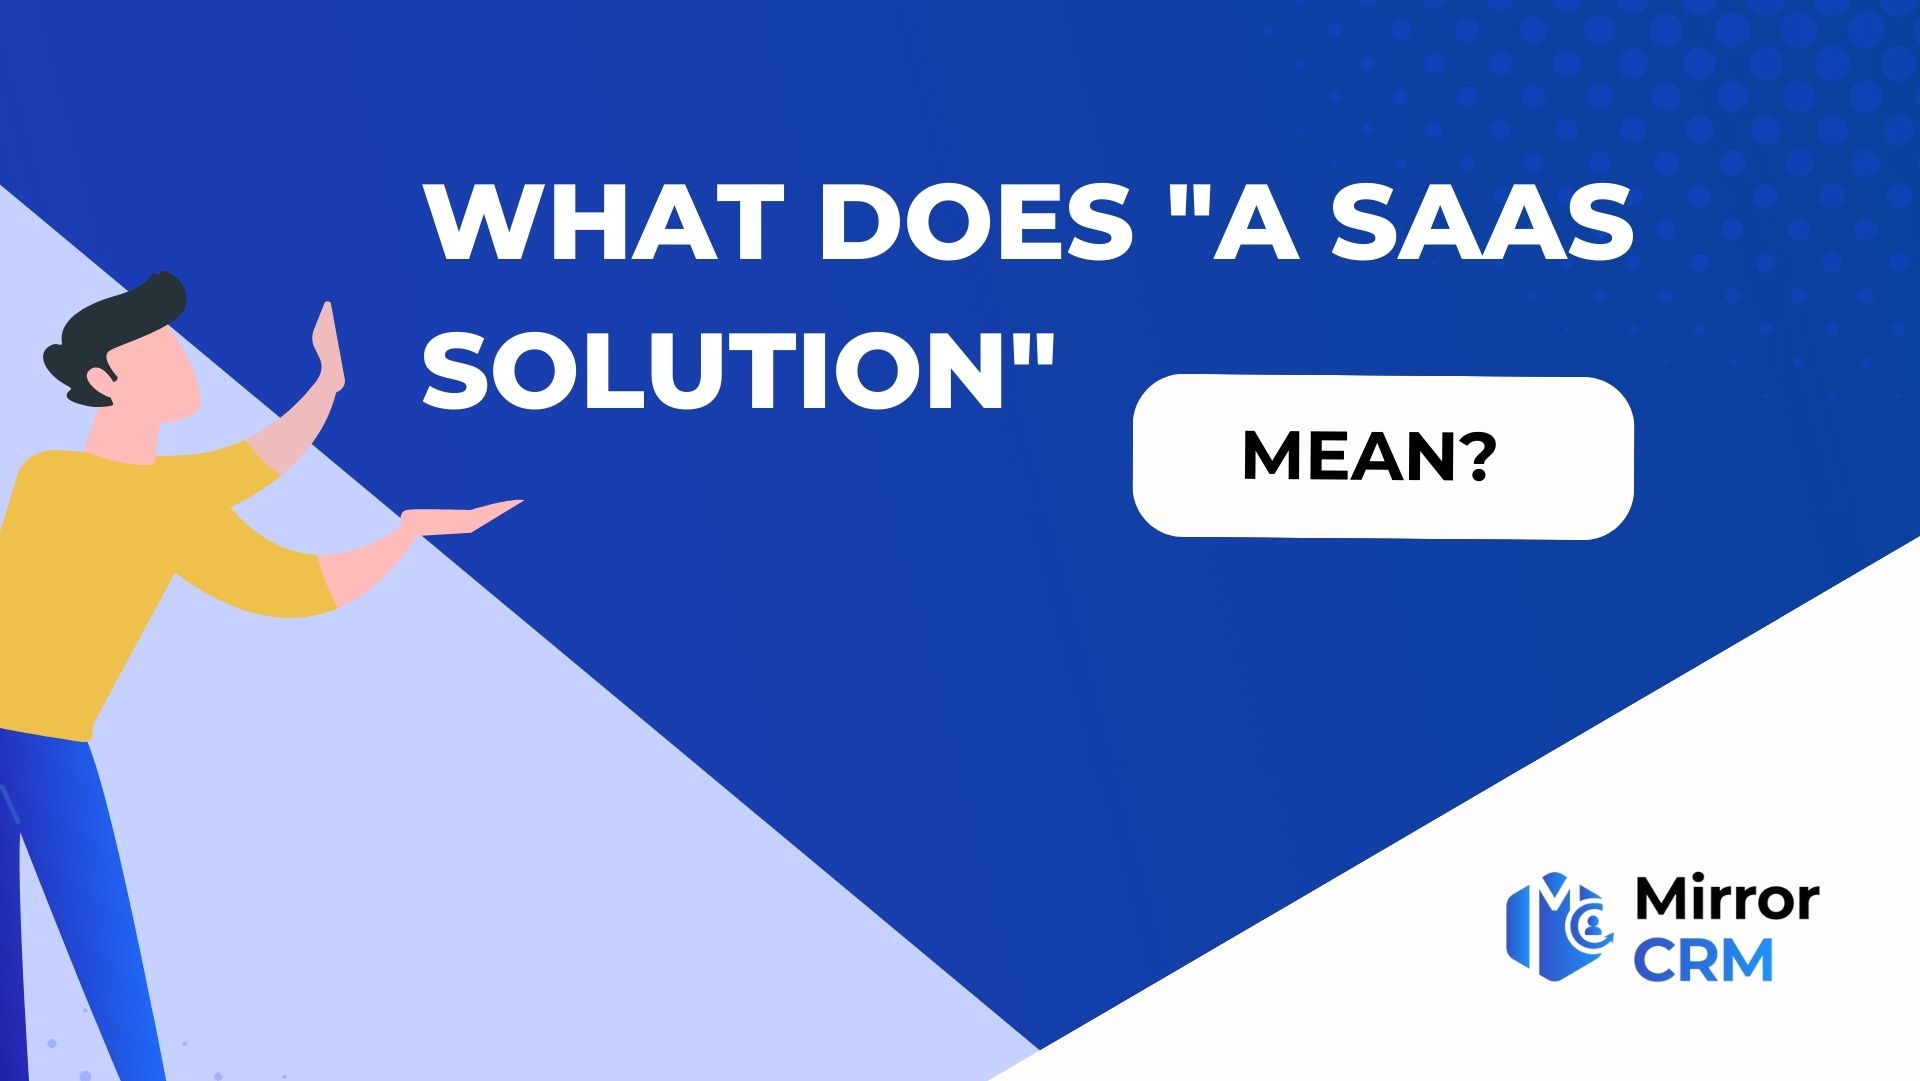 What does "a SaaS solution" mean?